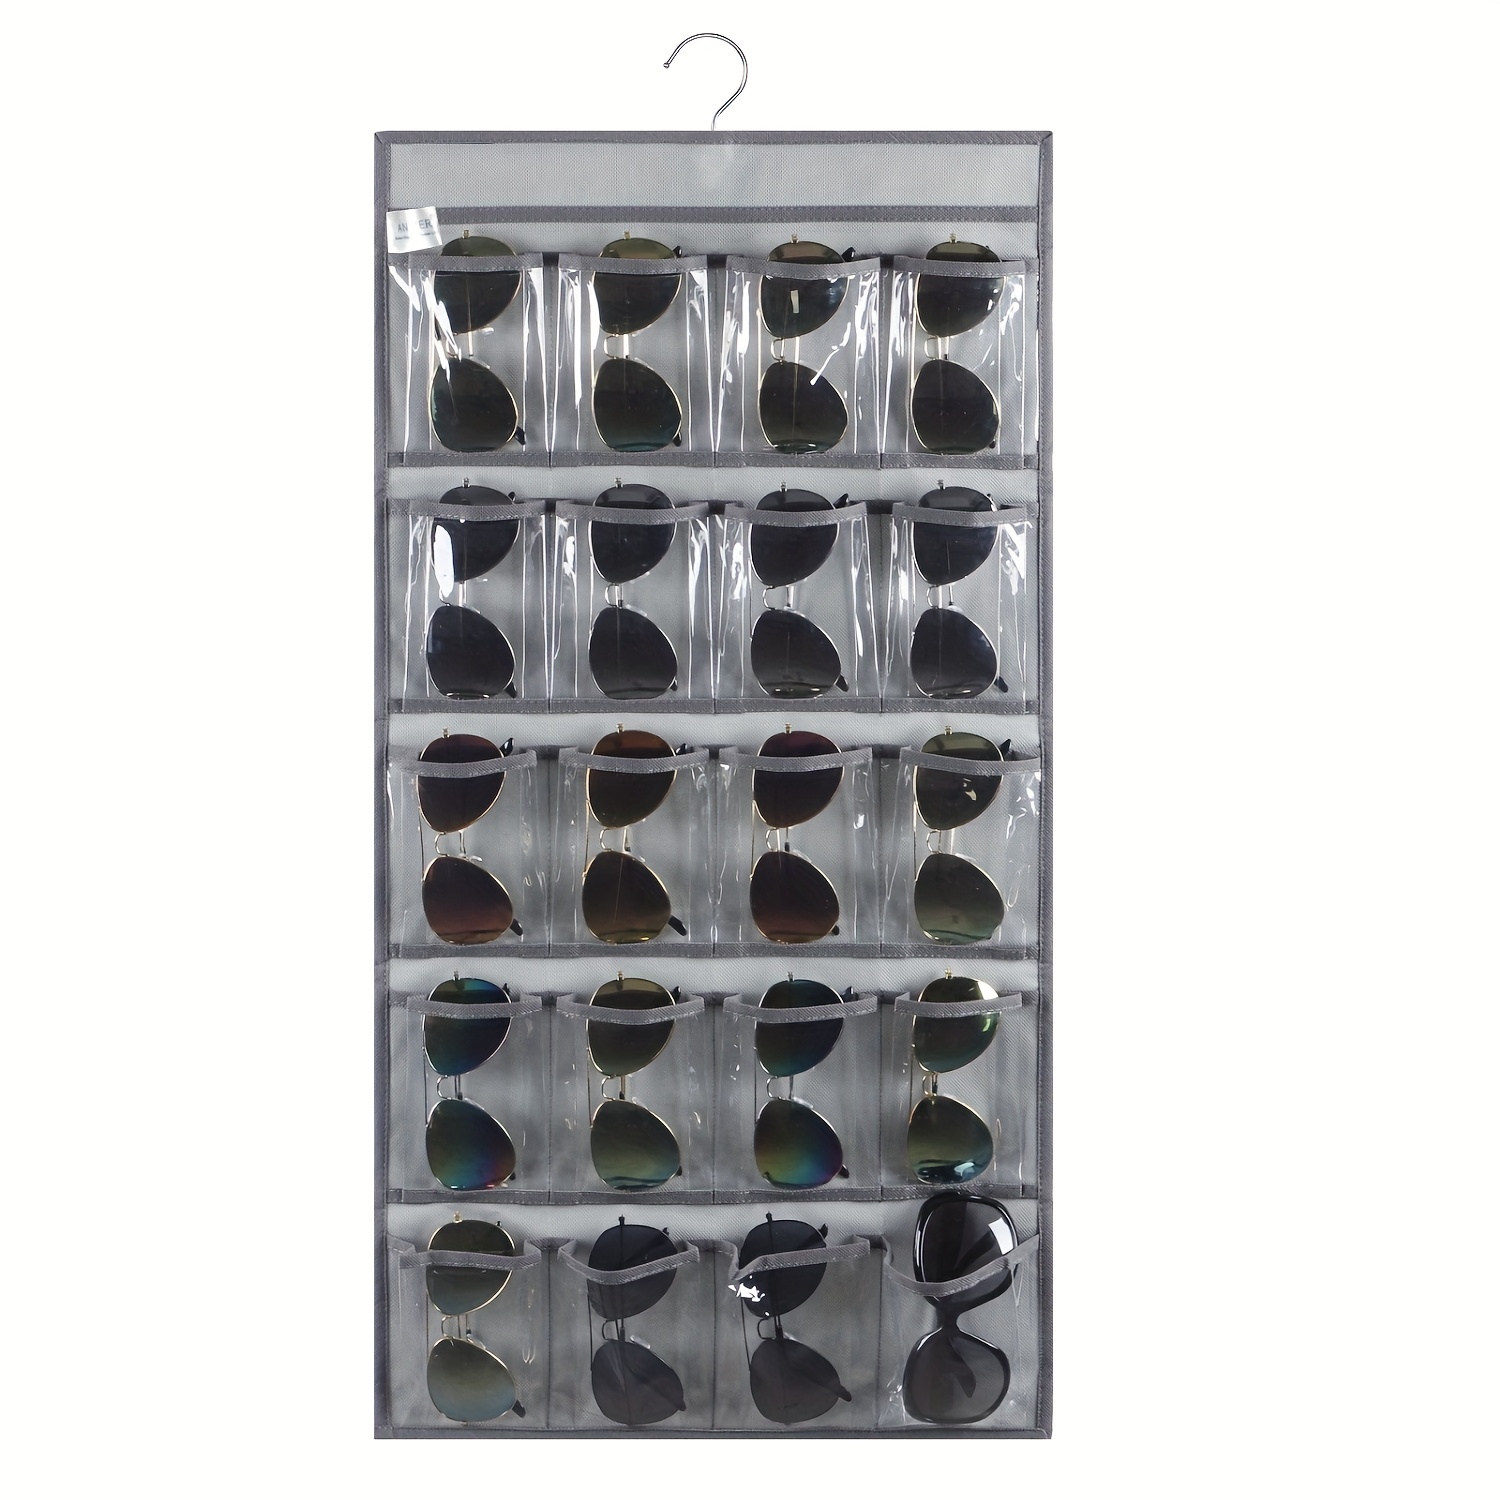 

1 Pc Hanging Sunglasses Organizer Wall Mounted Eyeglasses Holder With 20 Clear Slots